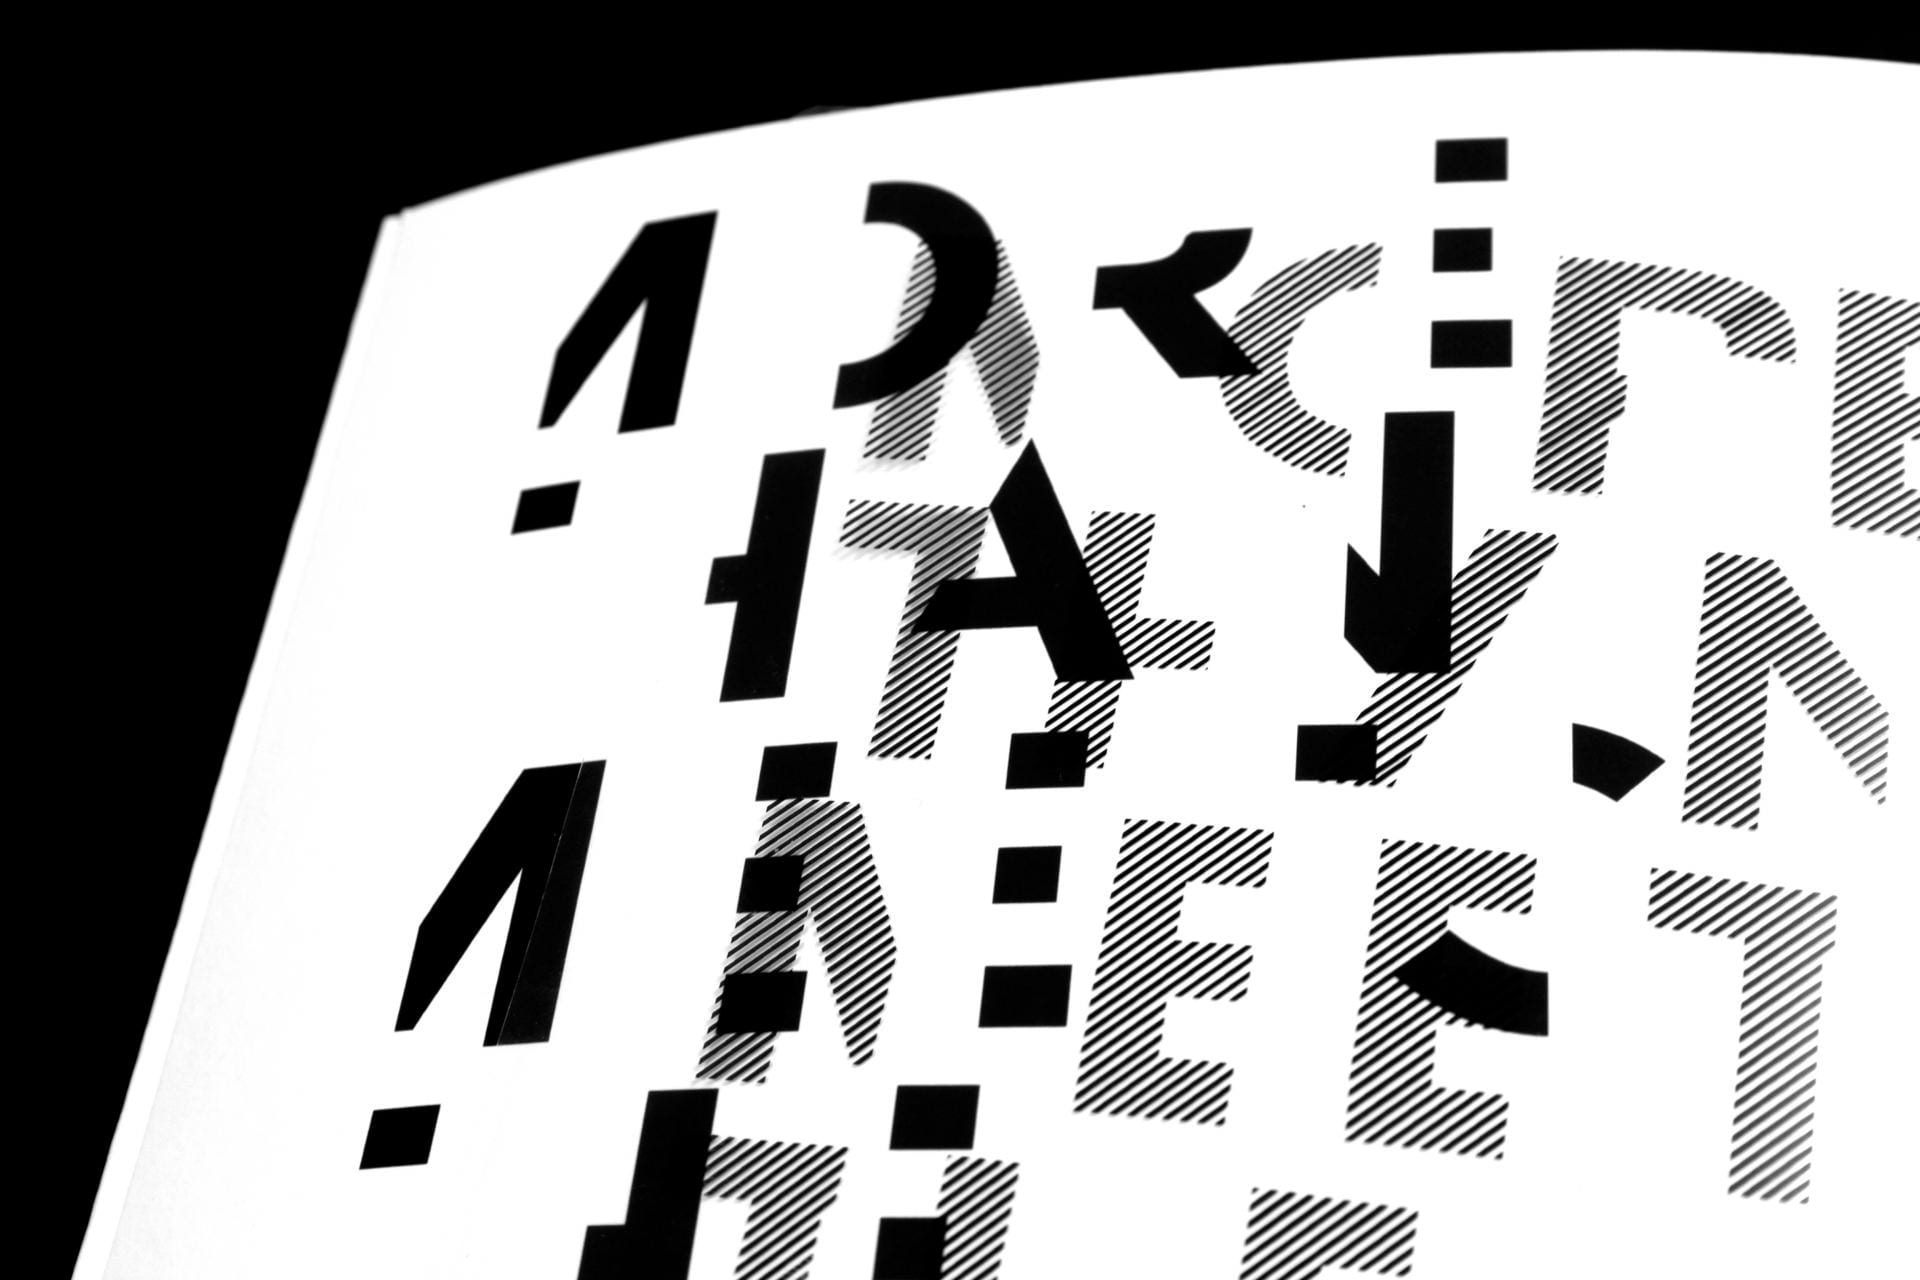 A selection of cut up letters, some black, some dotted, when put together it reads: 